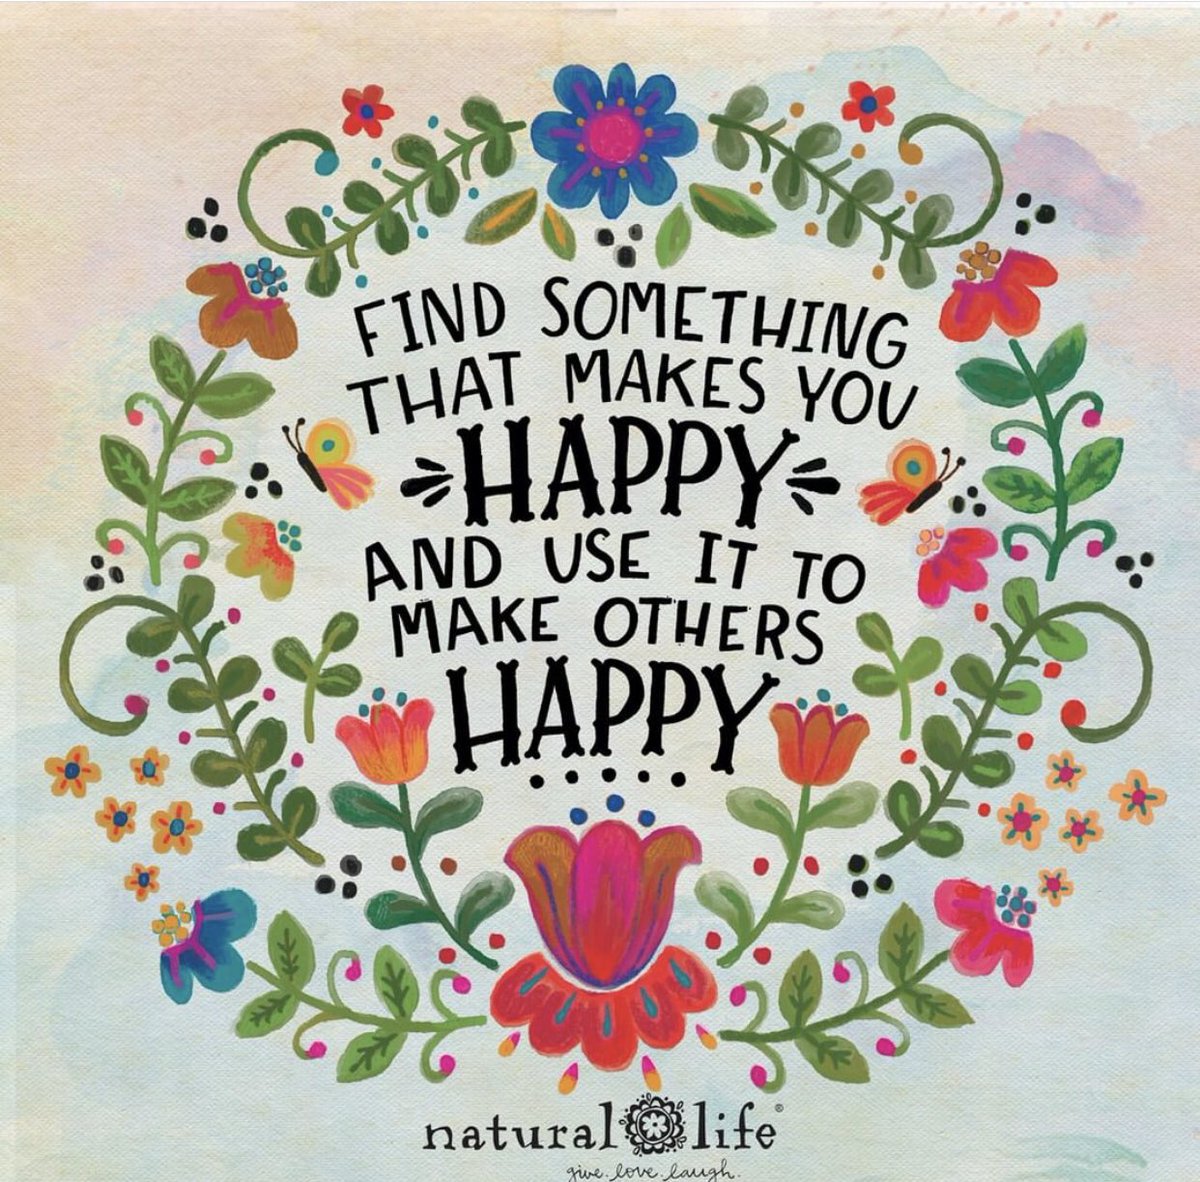 “Today, find something that makes you happy & use it to make others happy!” Sincere, human connection...we ALL need it! 🥰❤️😊 #ALLmeansALL @MCOE_Now @CALSAfamilia @ACSA_info @cueinc @unfoldthesoul @lcruzconsulting @BreneBrown @mrsjessgomez @ProfeMsVgodinez @pgilders @RosaIsiah